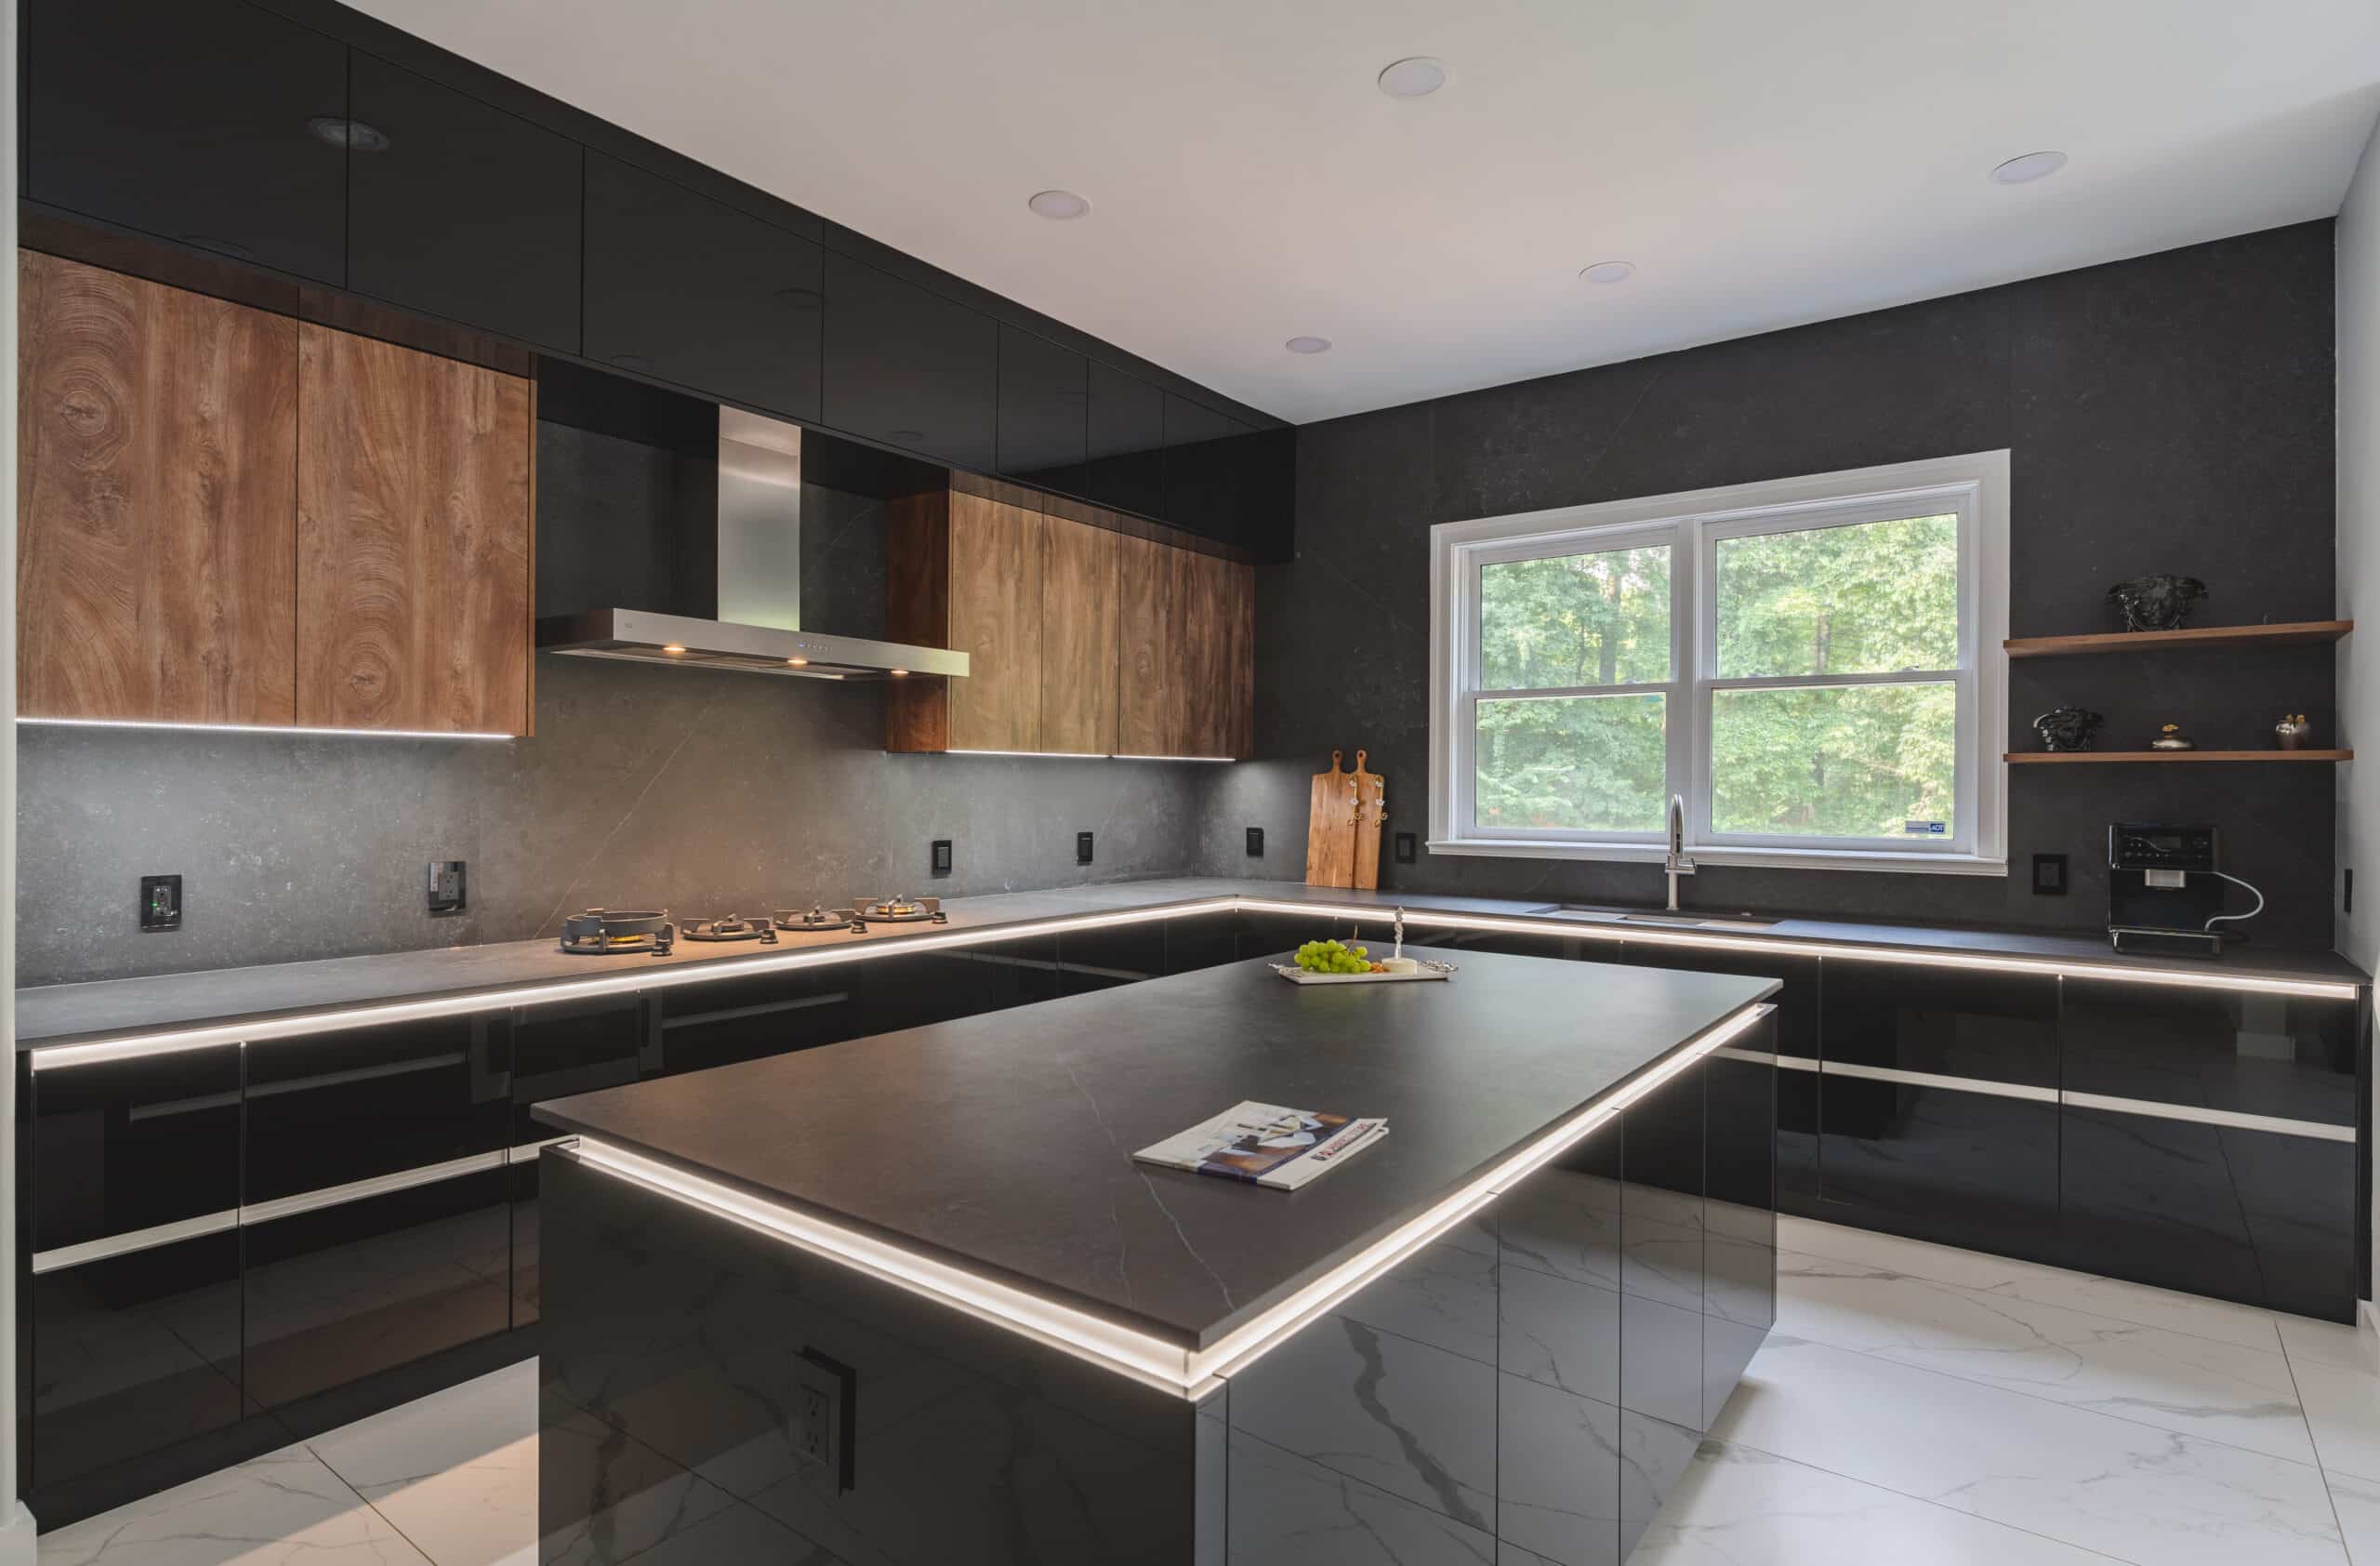 A contemporary kitchen featuring sleek black cabinets and countertop